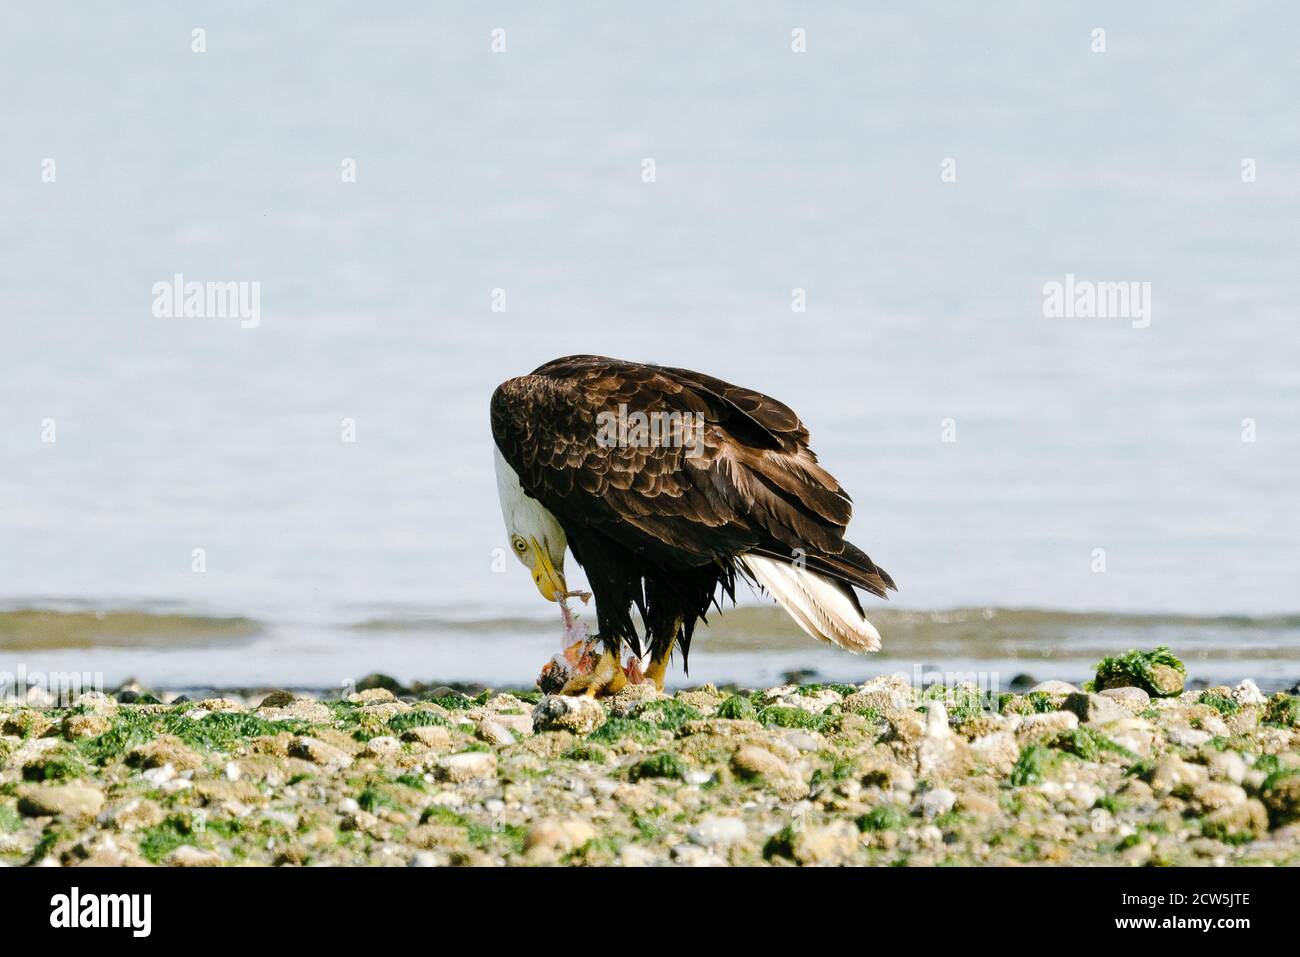 View from behind of a bald eagle eating a fish on a Puget Sound beach Stock Photo